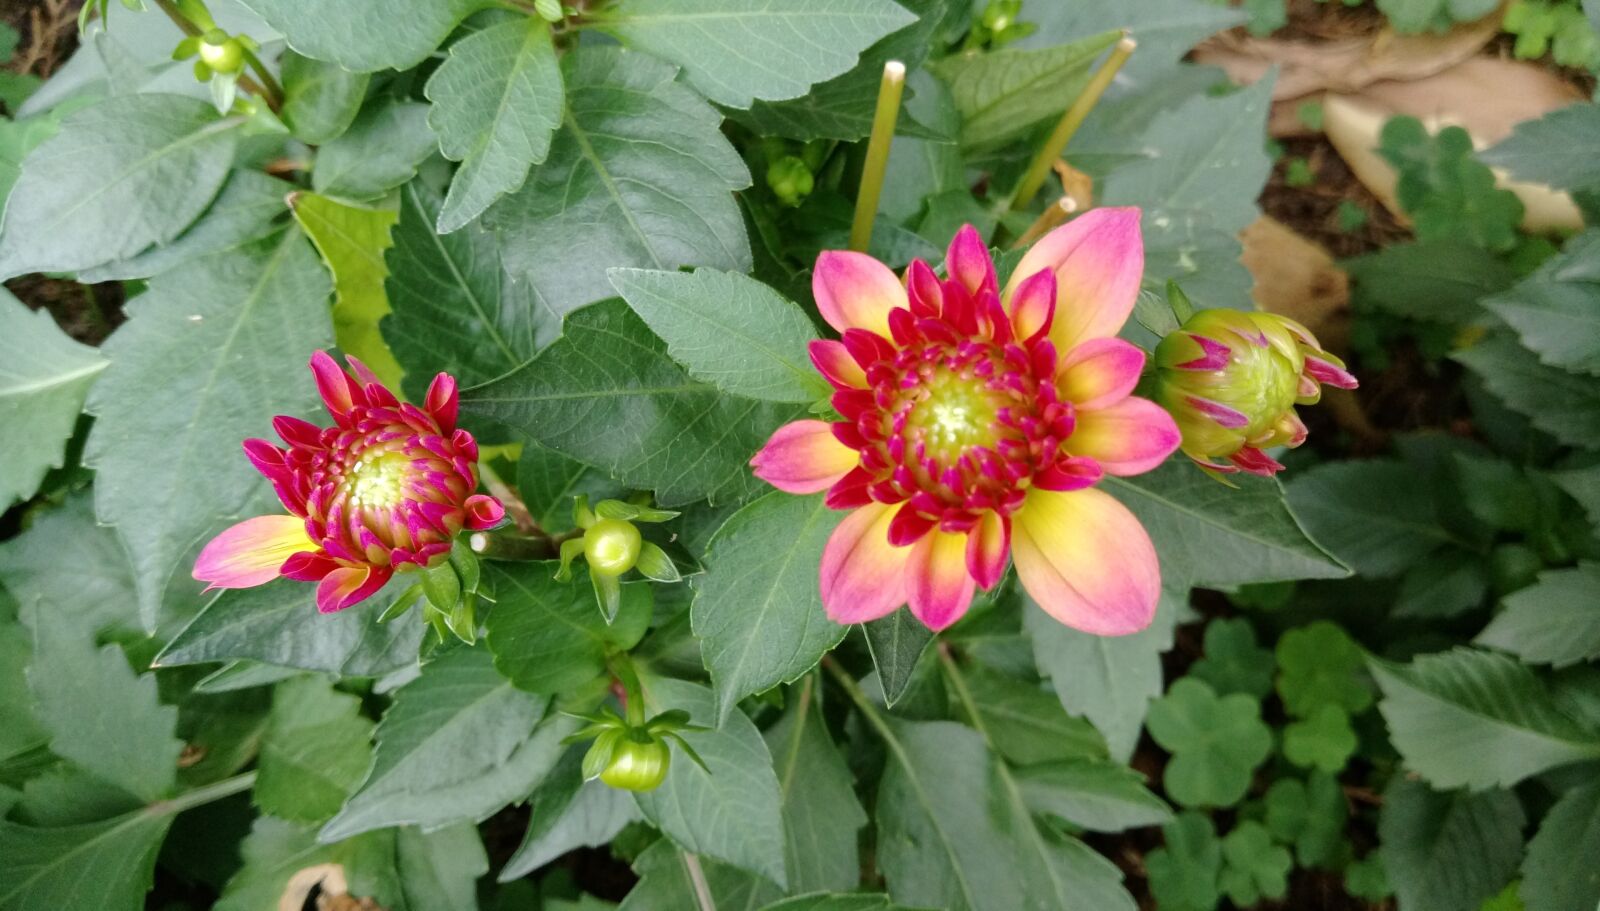 HTC ONE X9 DUAL SIM sample photo. Flower, nature, plant photography